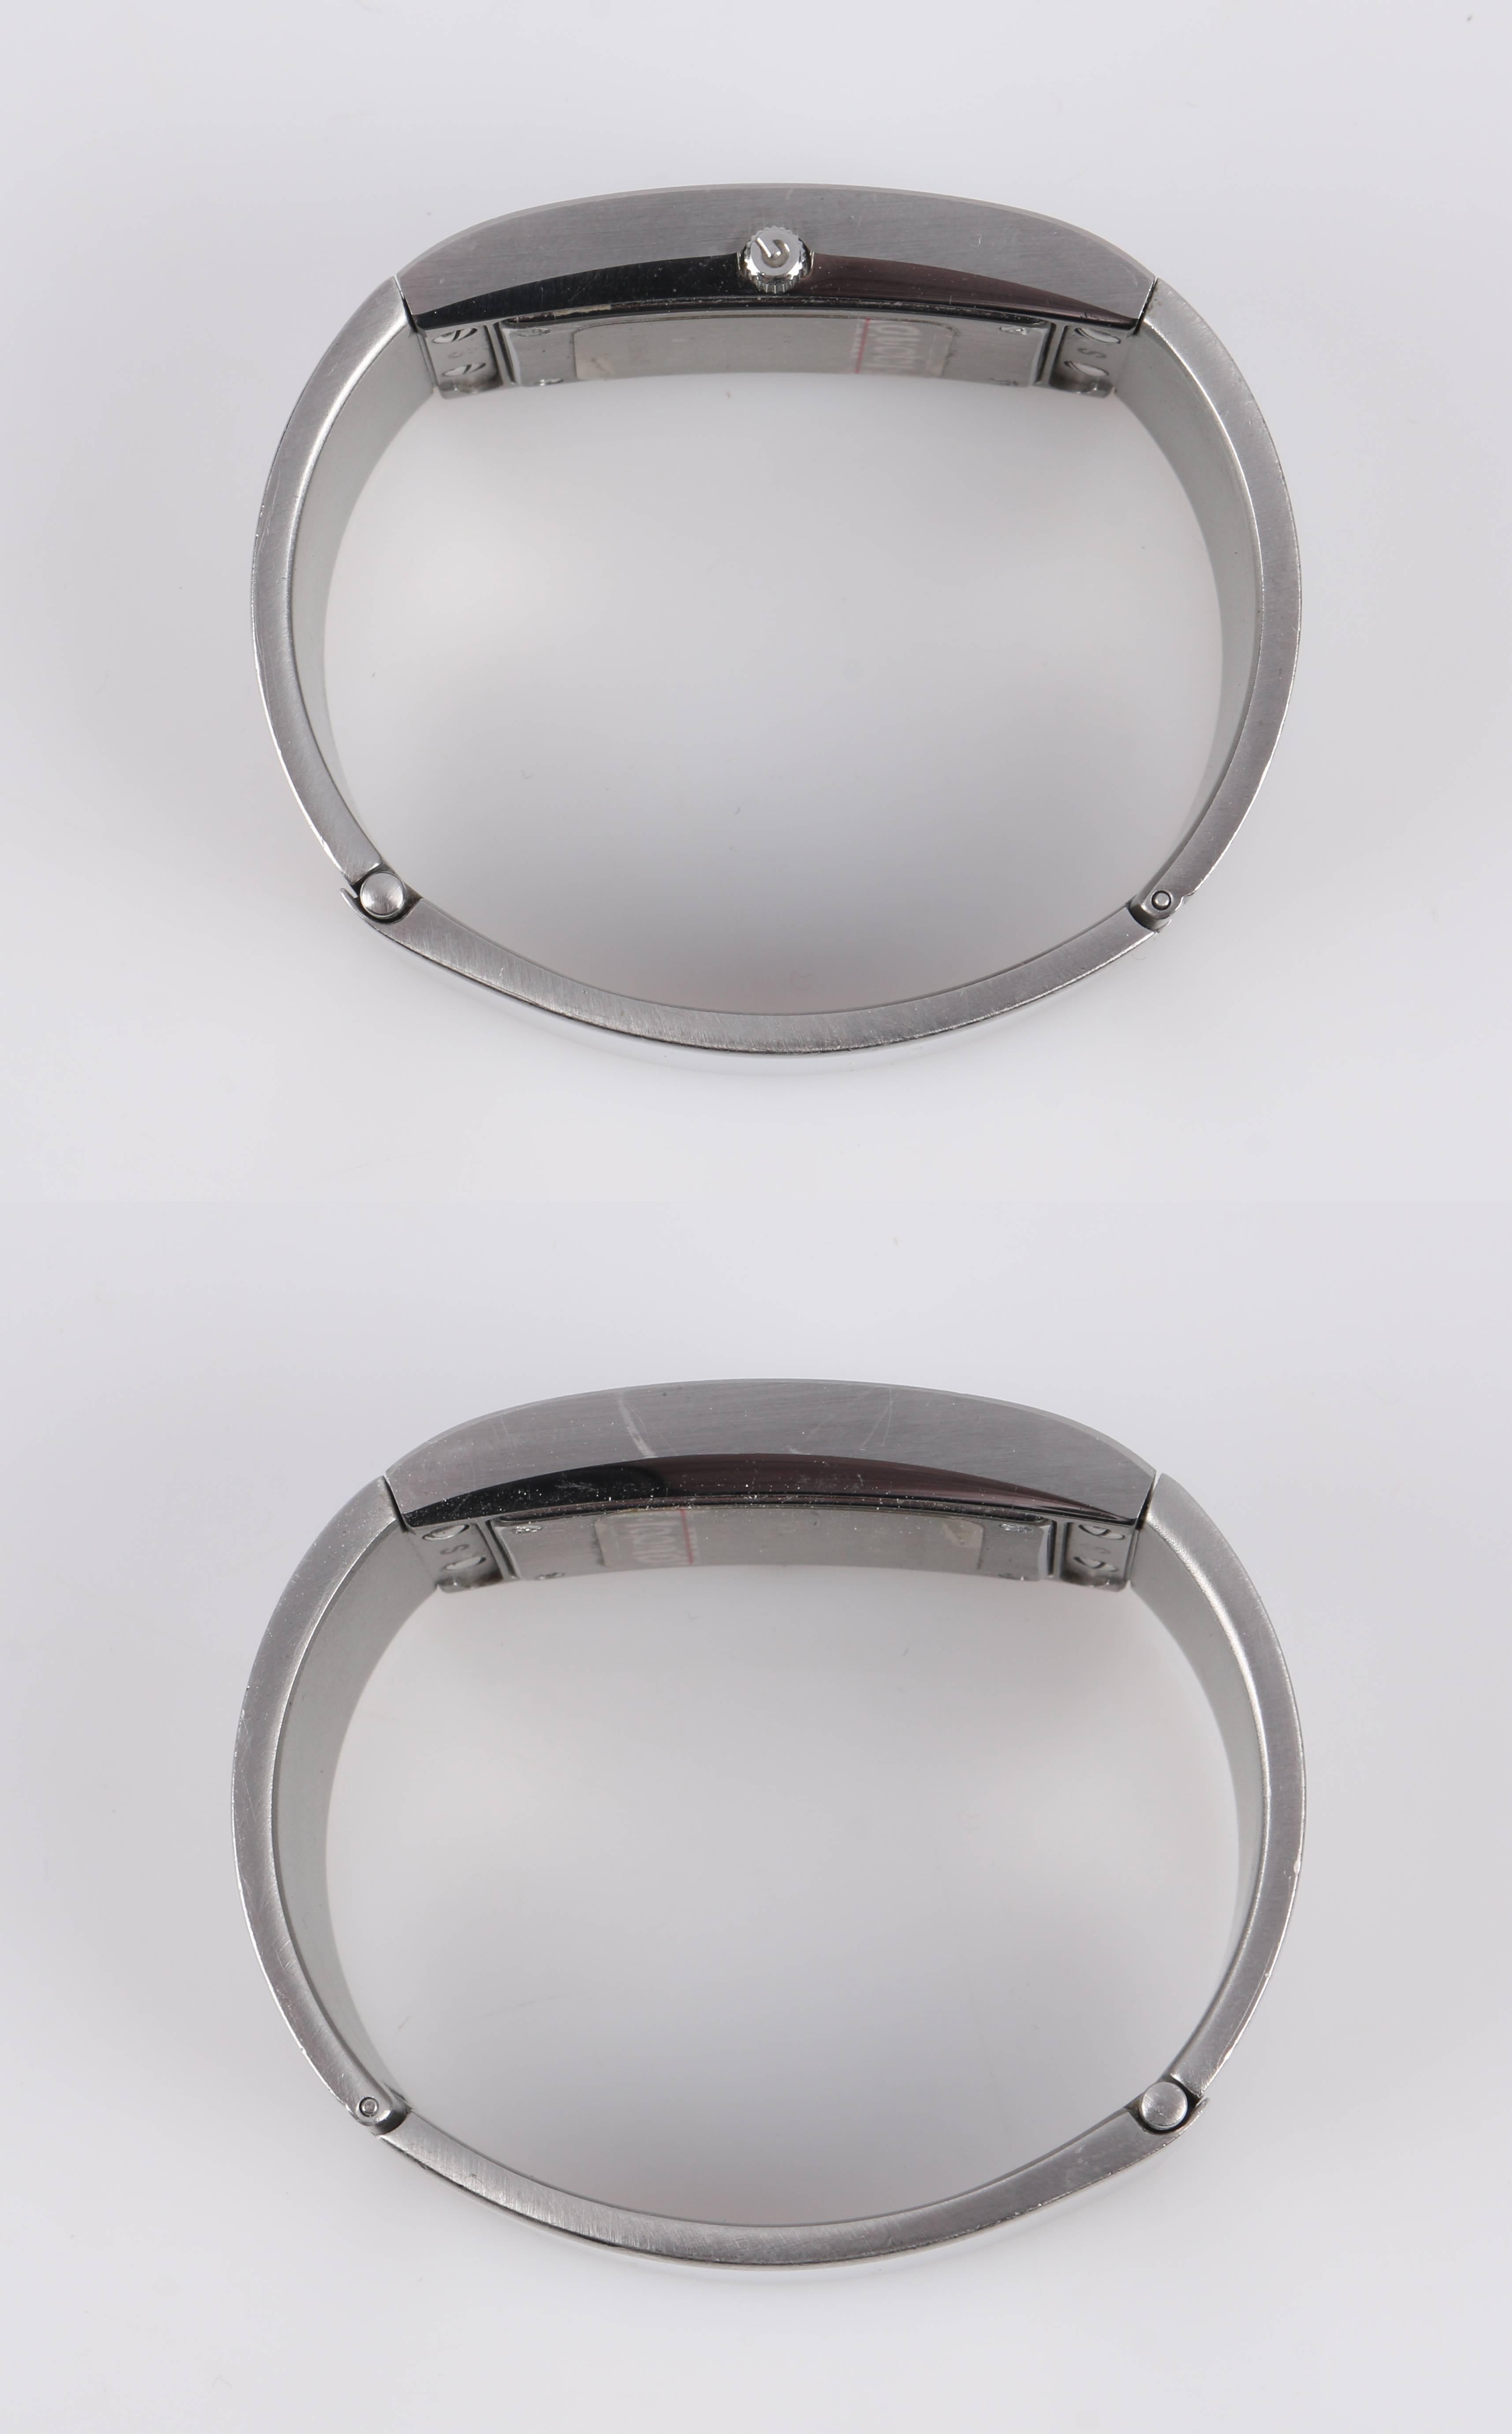 gucci stainless steel bangle watch